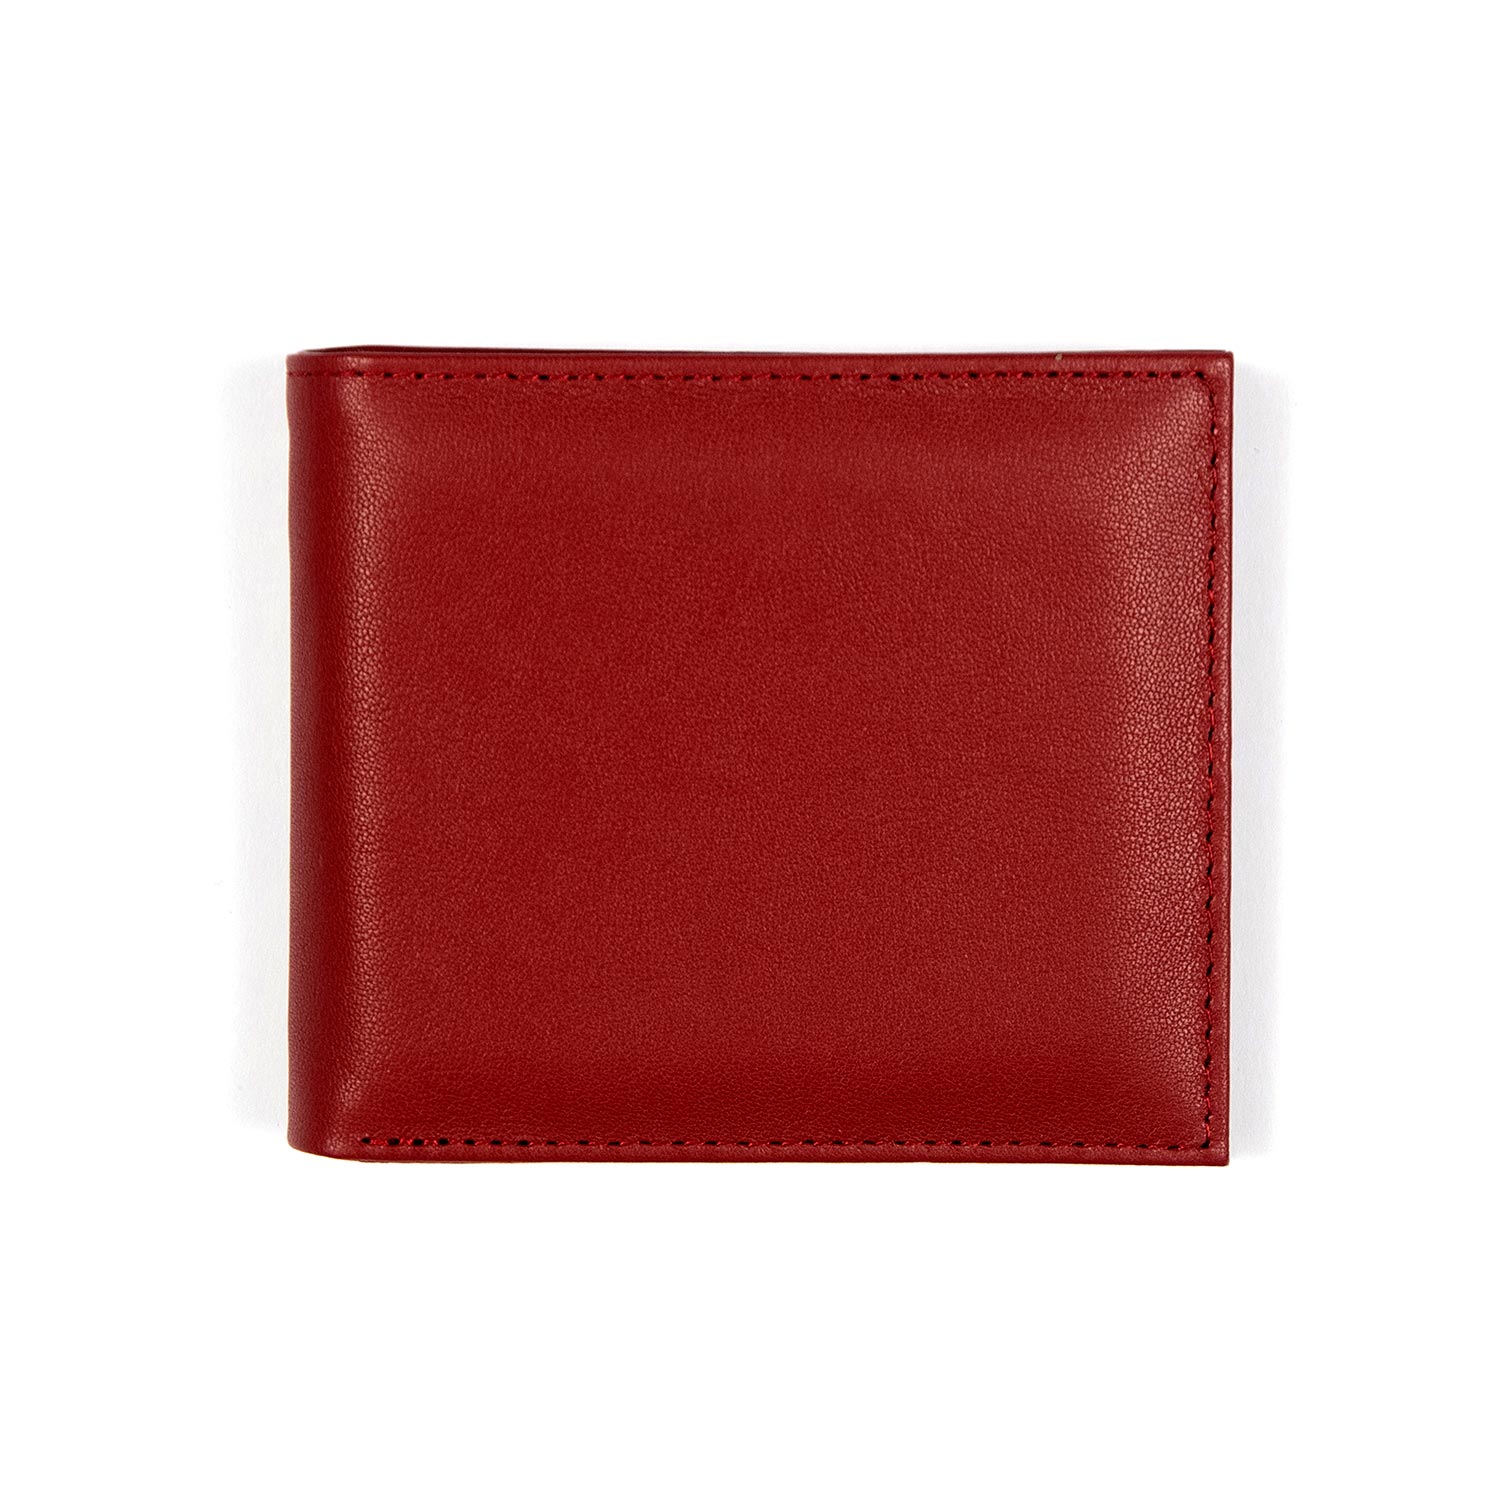 Mens Leather Wallets Bifold Black/Red